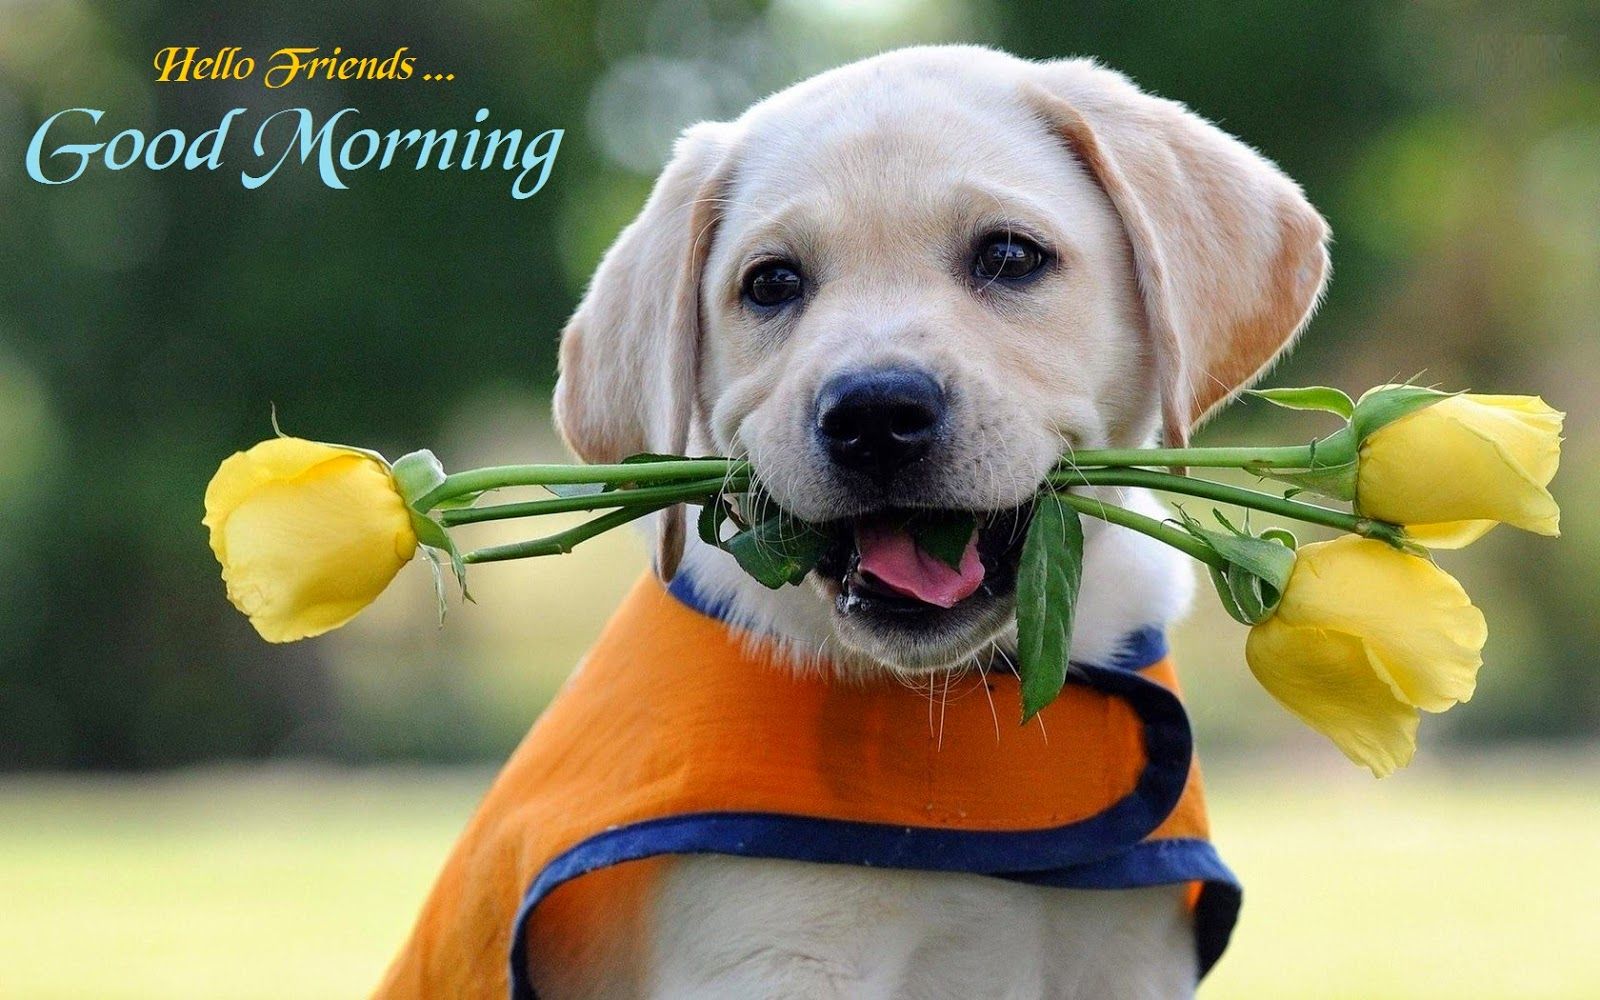 Good Morning Puppy Images